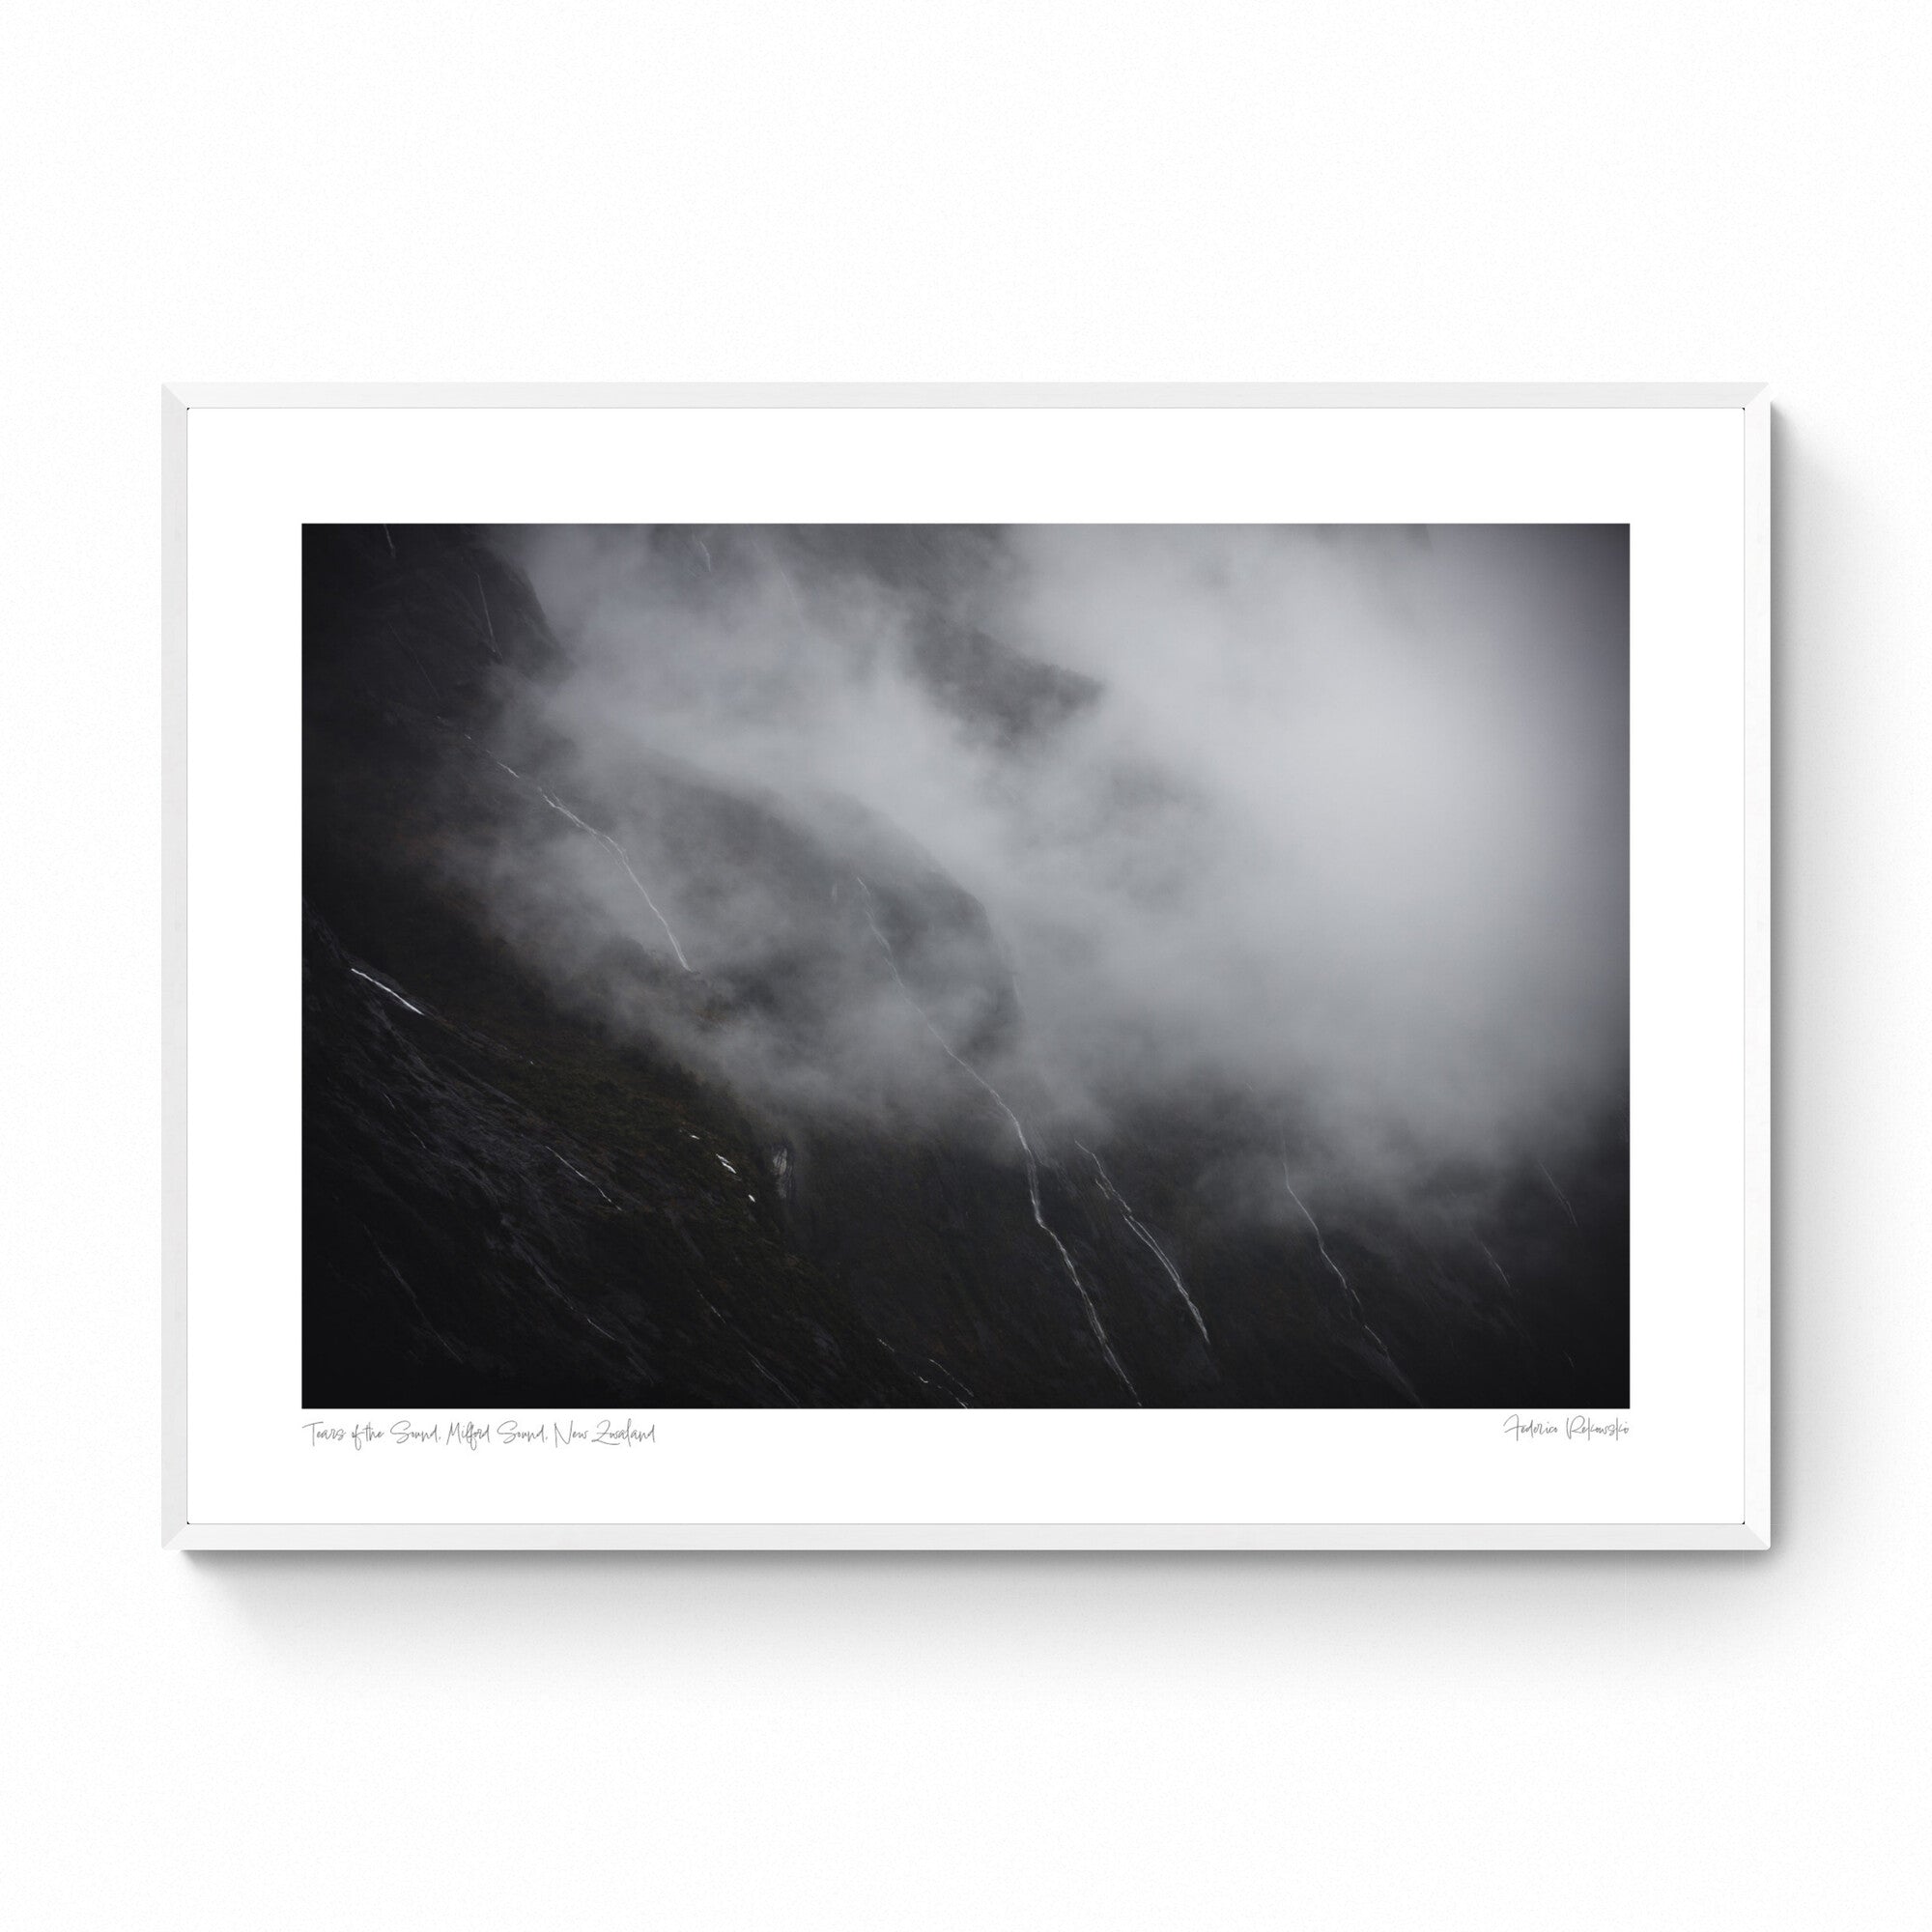 Photograph titled 'Tears of the Sound' showing misty waterfalls on the cliffs of Milford Sound, New Zealand, resembling tears against a somber backdrop.